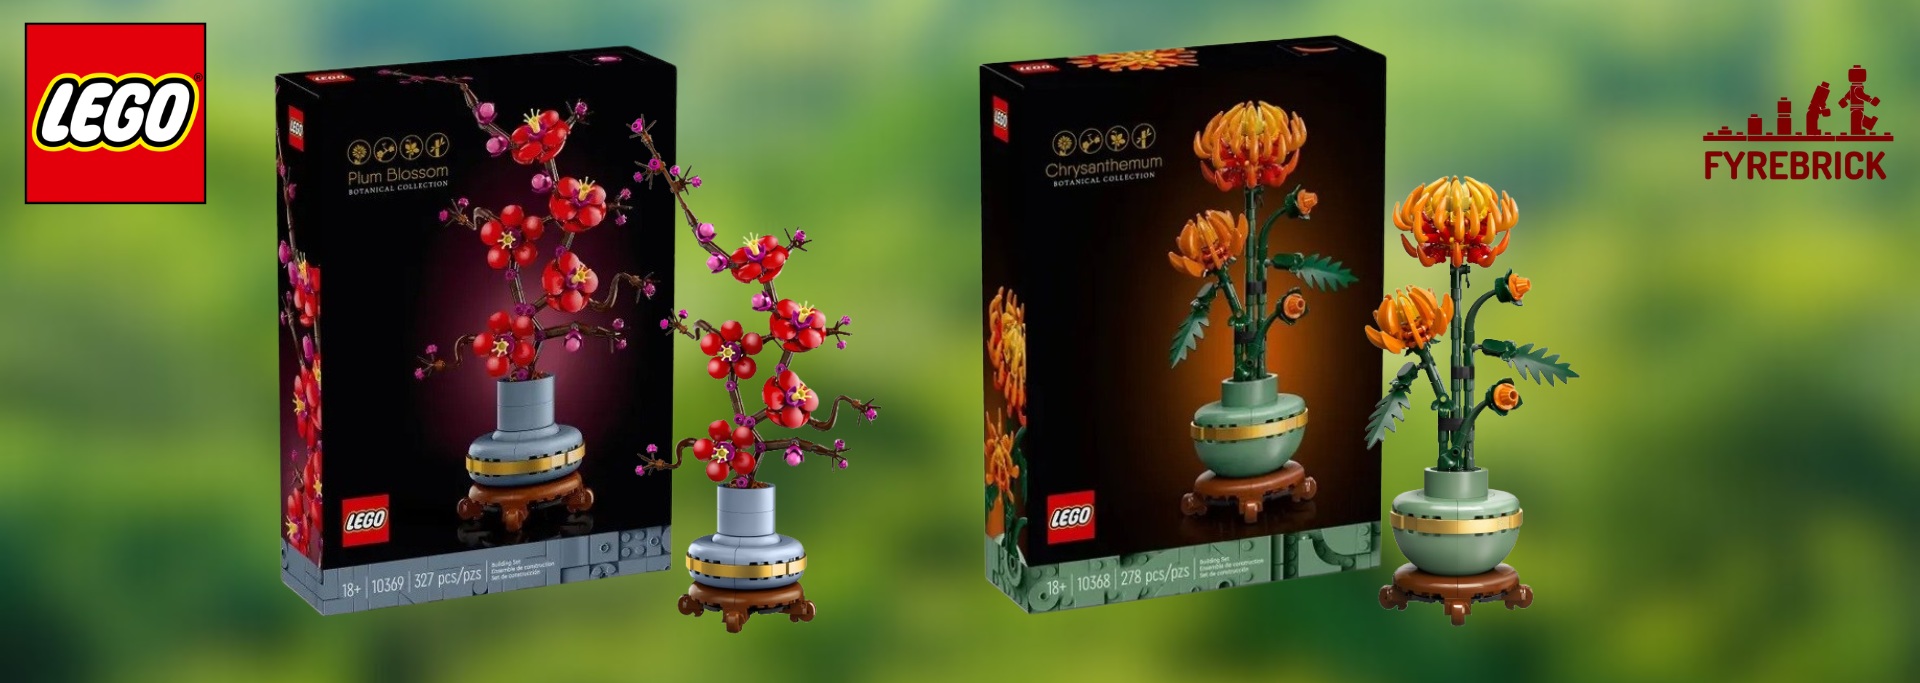 https://fyrebrick.be/collections/lego-botanical-collection